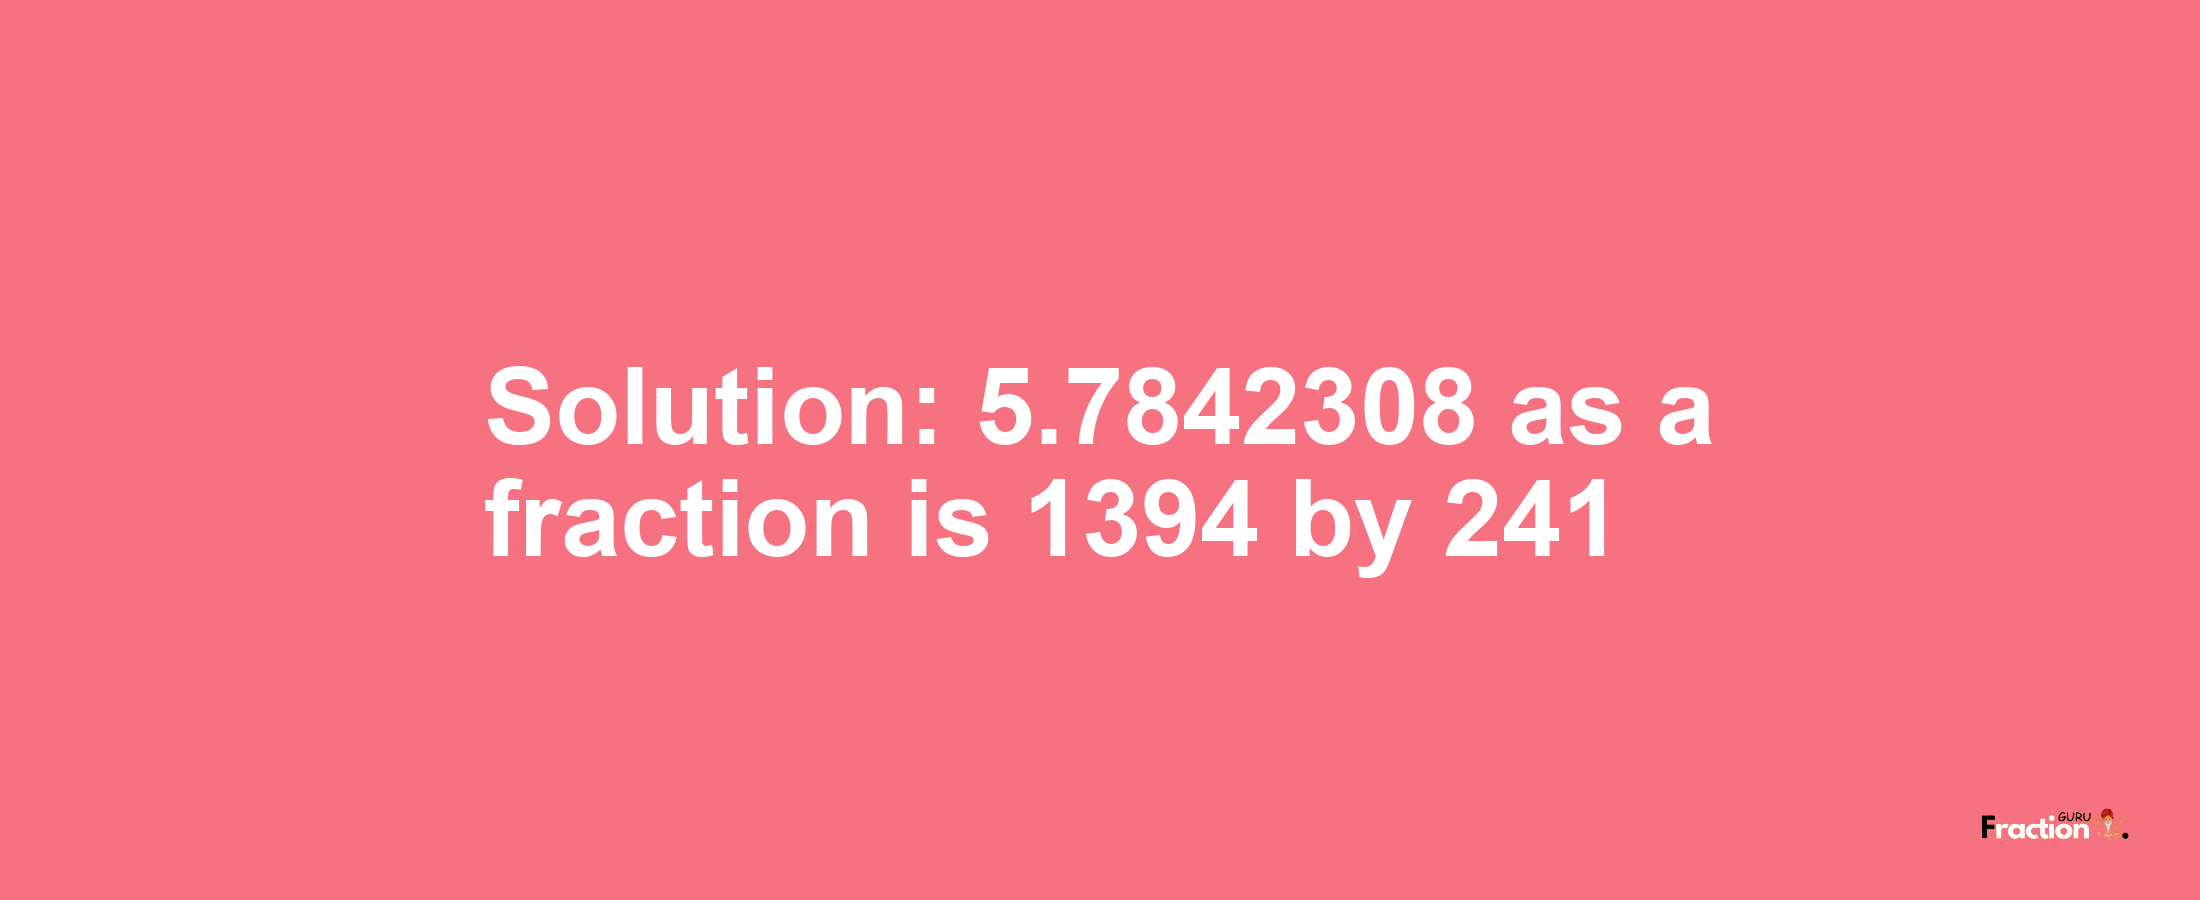 Solution:5.7842308 as a fraction is 1394/241